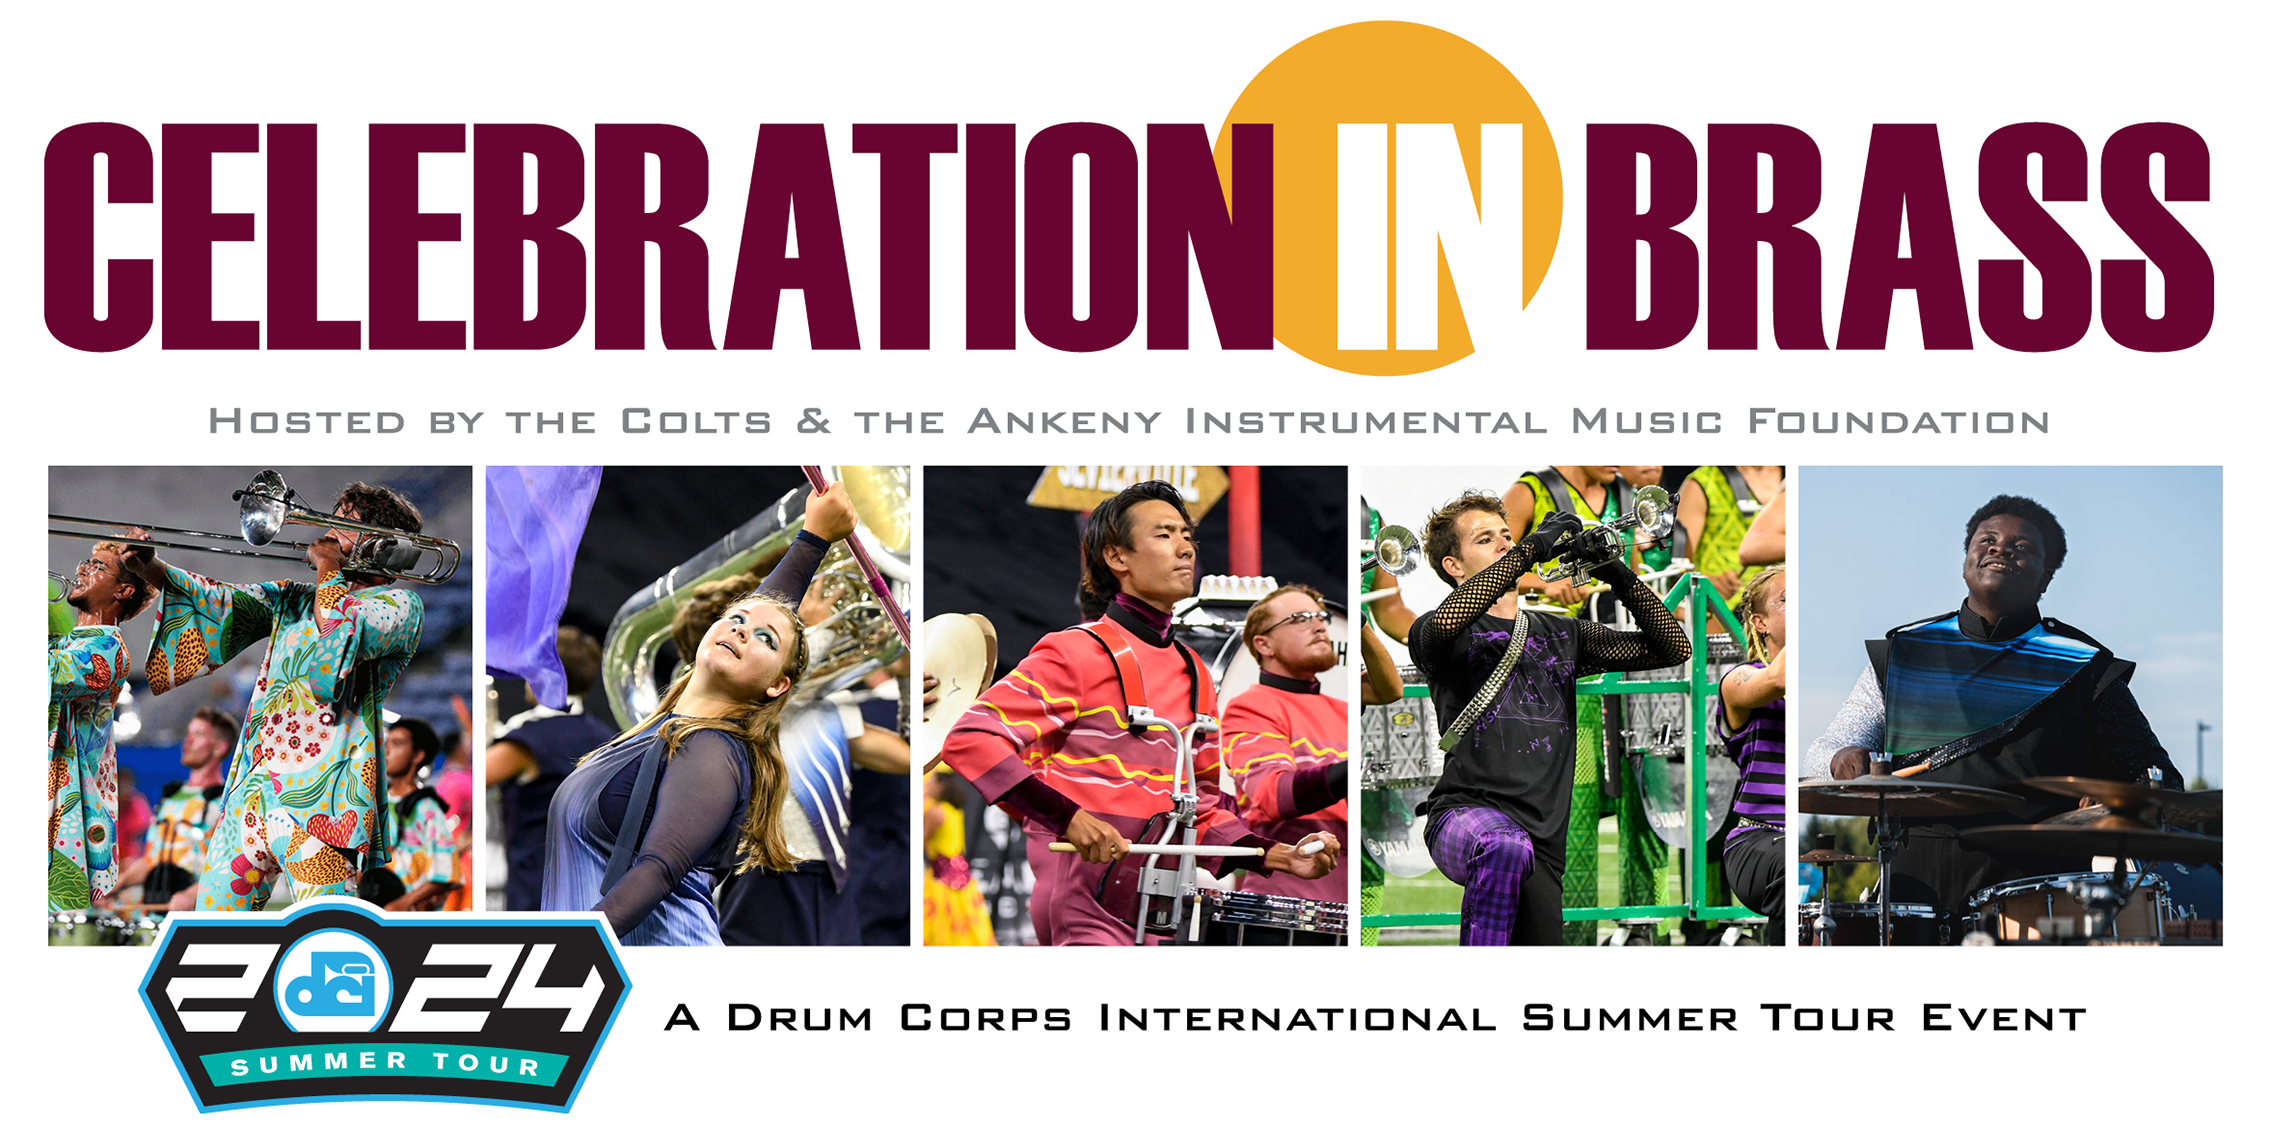 Celebration In Brass hosted by the Colts and the Ankeny Instrumental Music Foundation